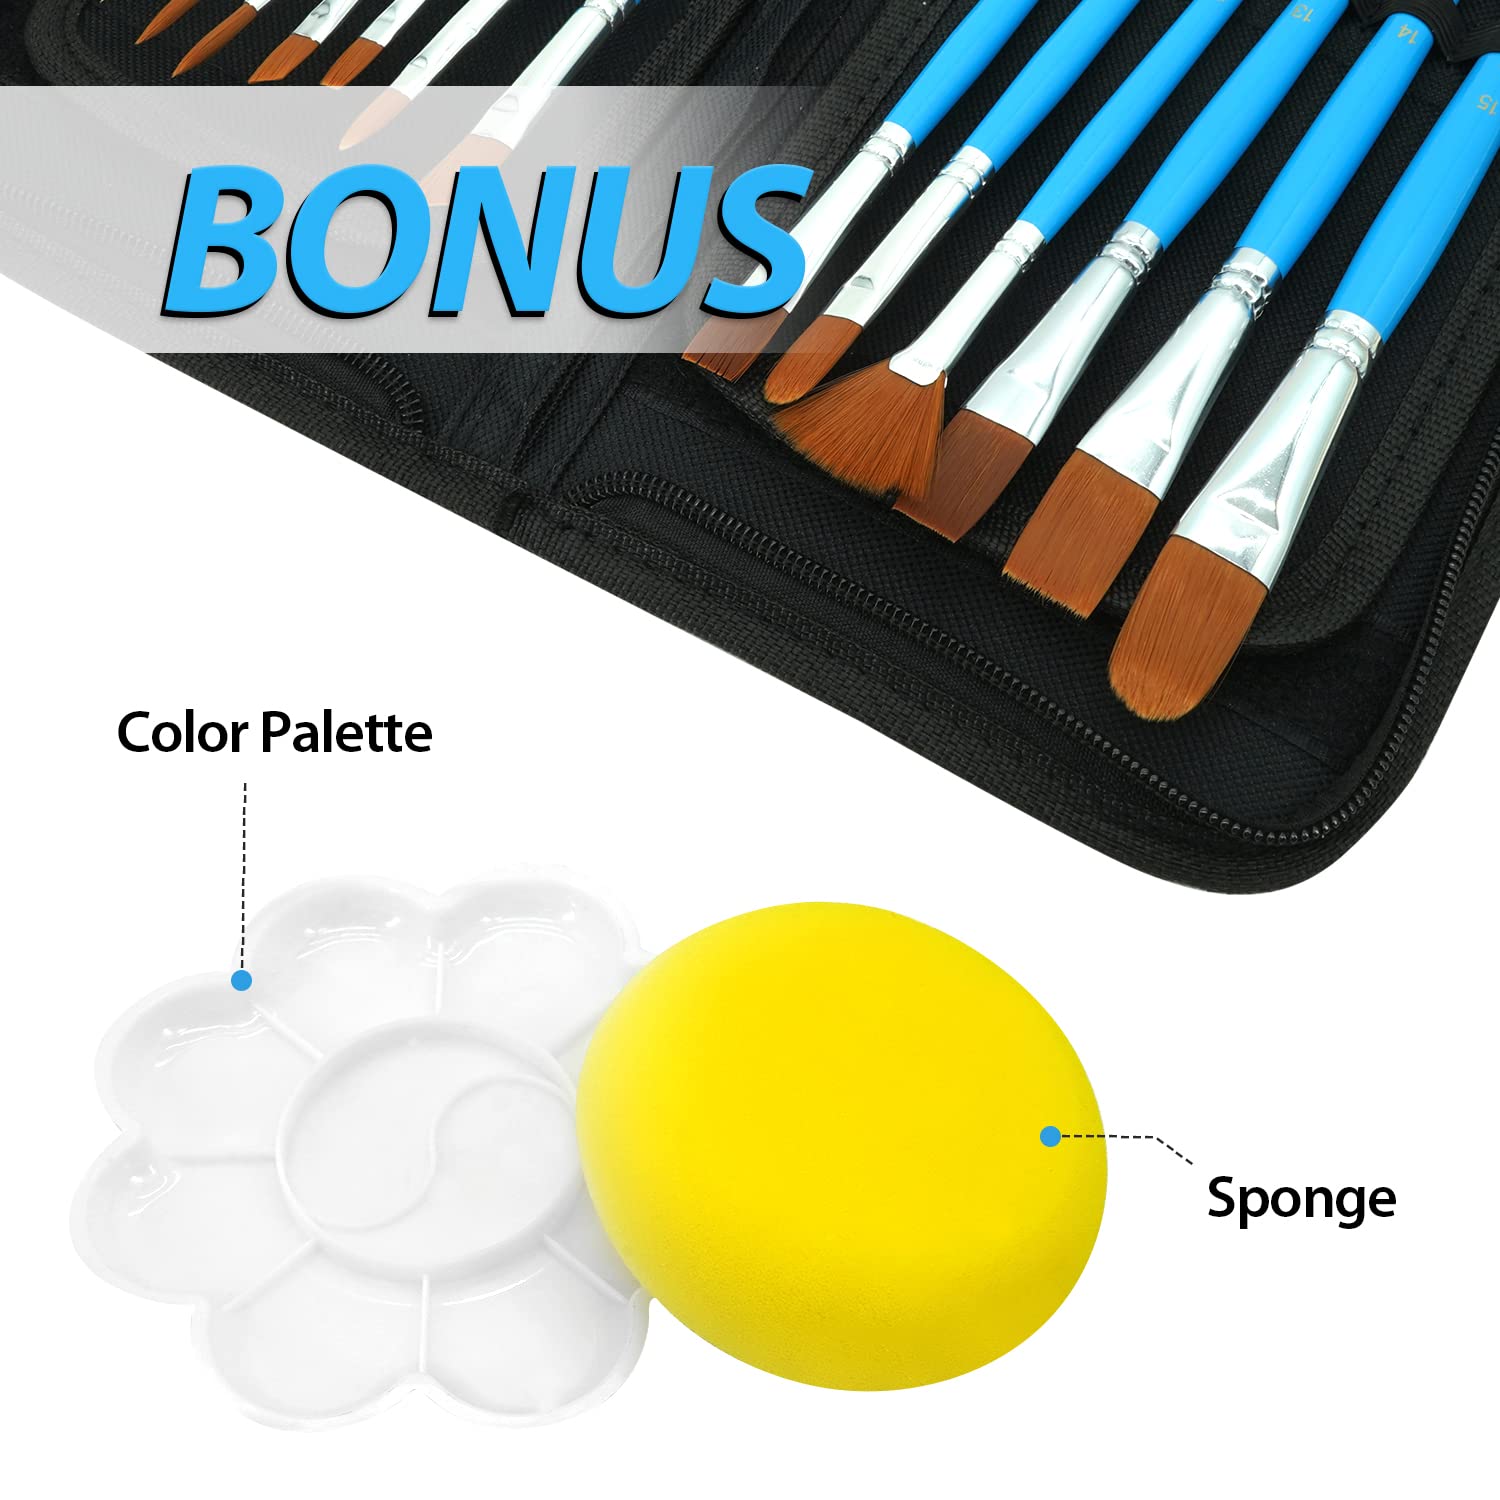 AUREUO Watercolor Paint Brush Set - 15 Nylon Painting Brushes, Sponge & Color Palette with a Pop-up Carrying Case as Paint Brush Holder for Beginner Watercolor Painting